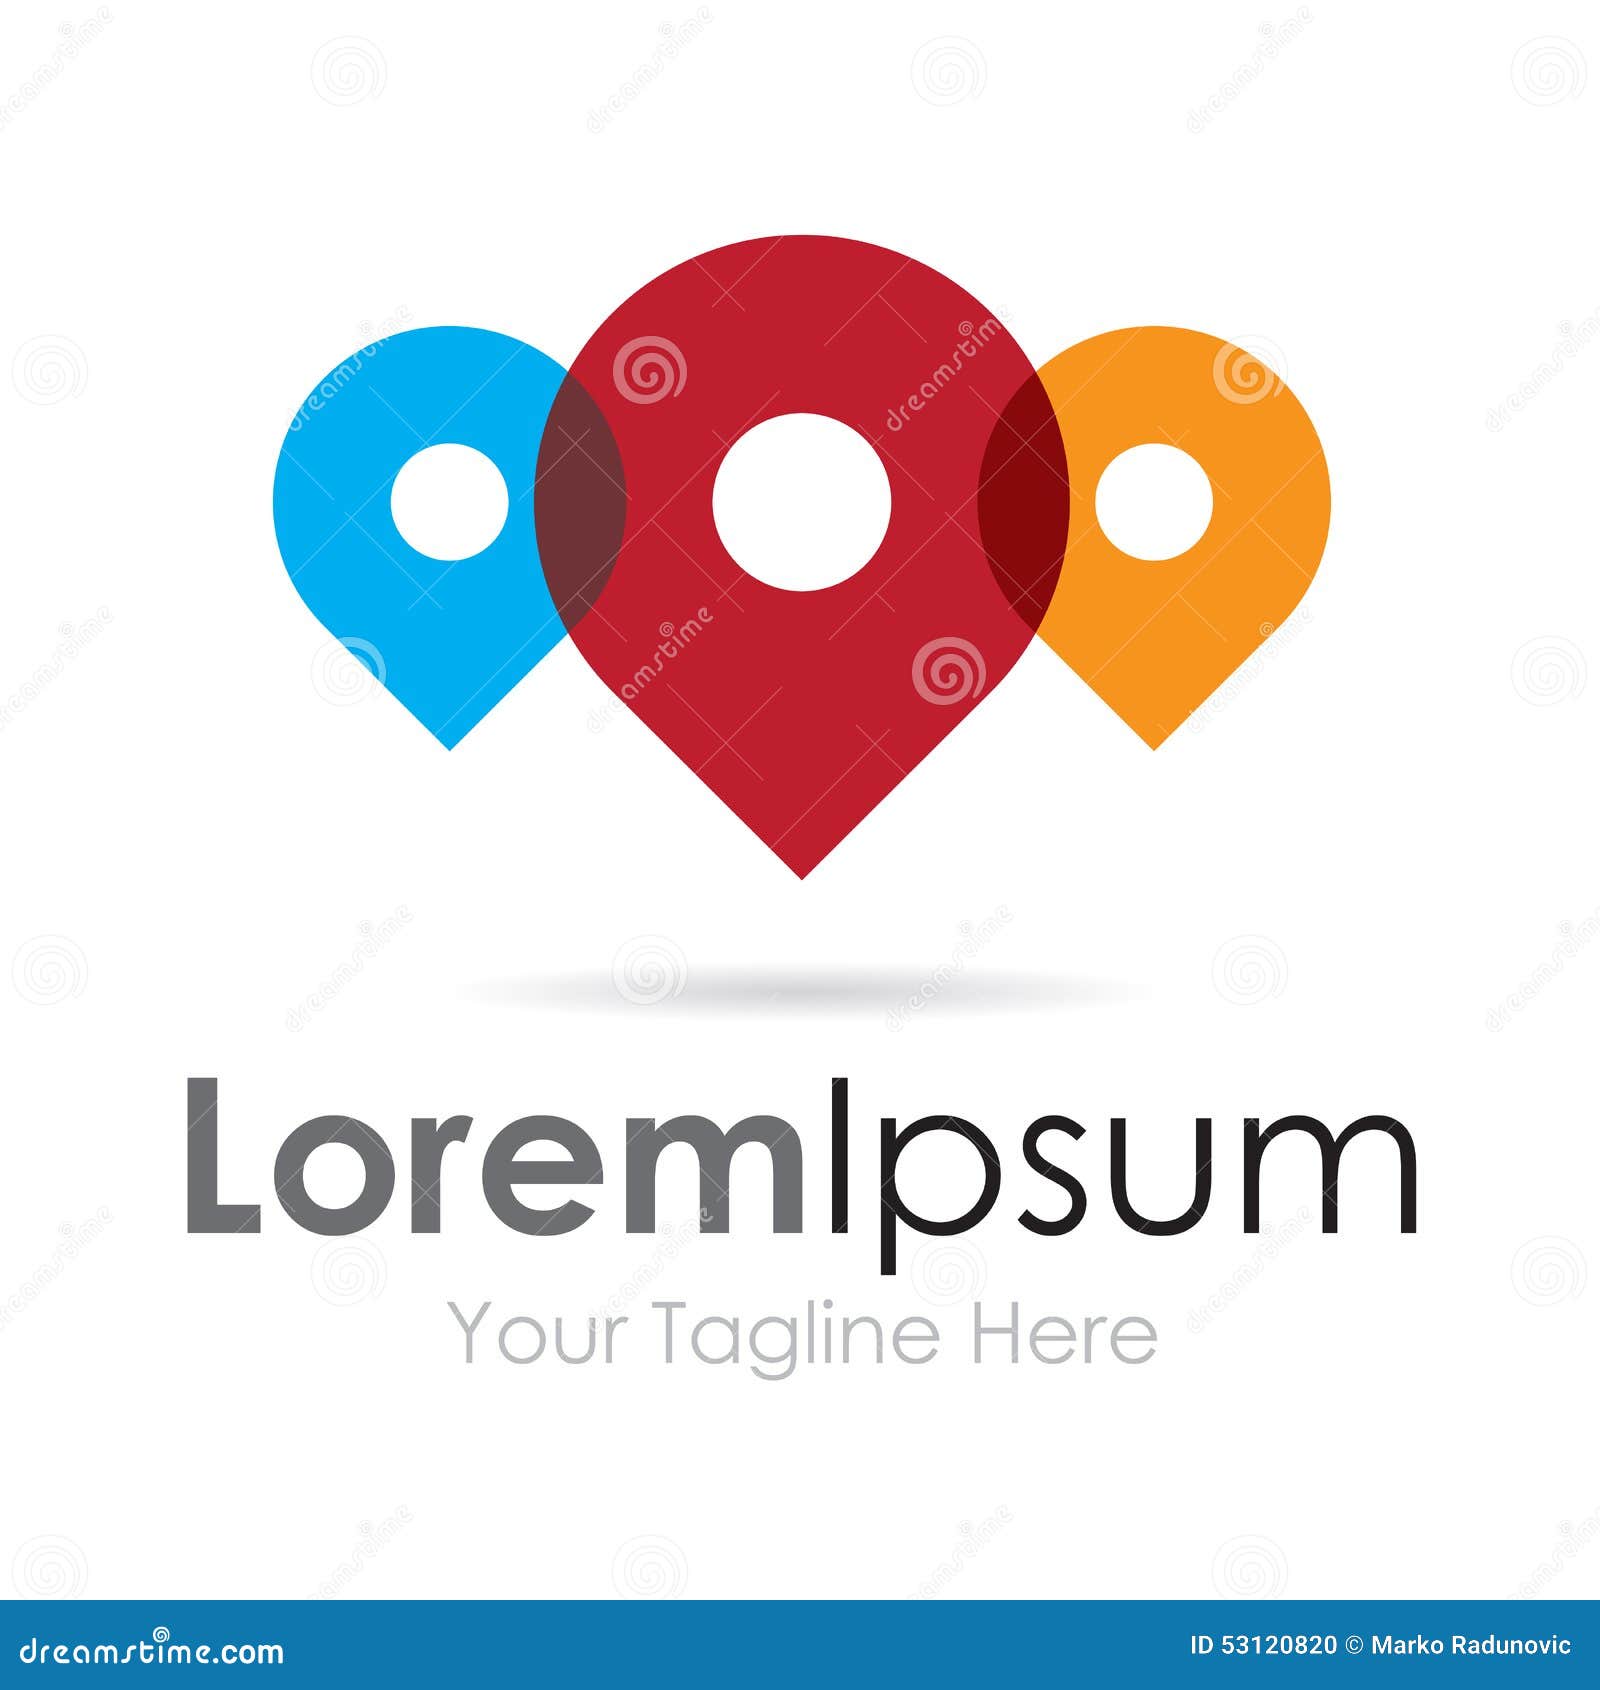 Location Pin Colorful And Fun Simple Business Icon Logo Stock